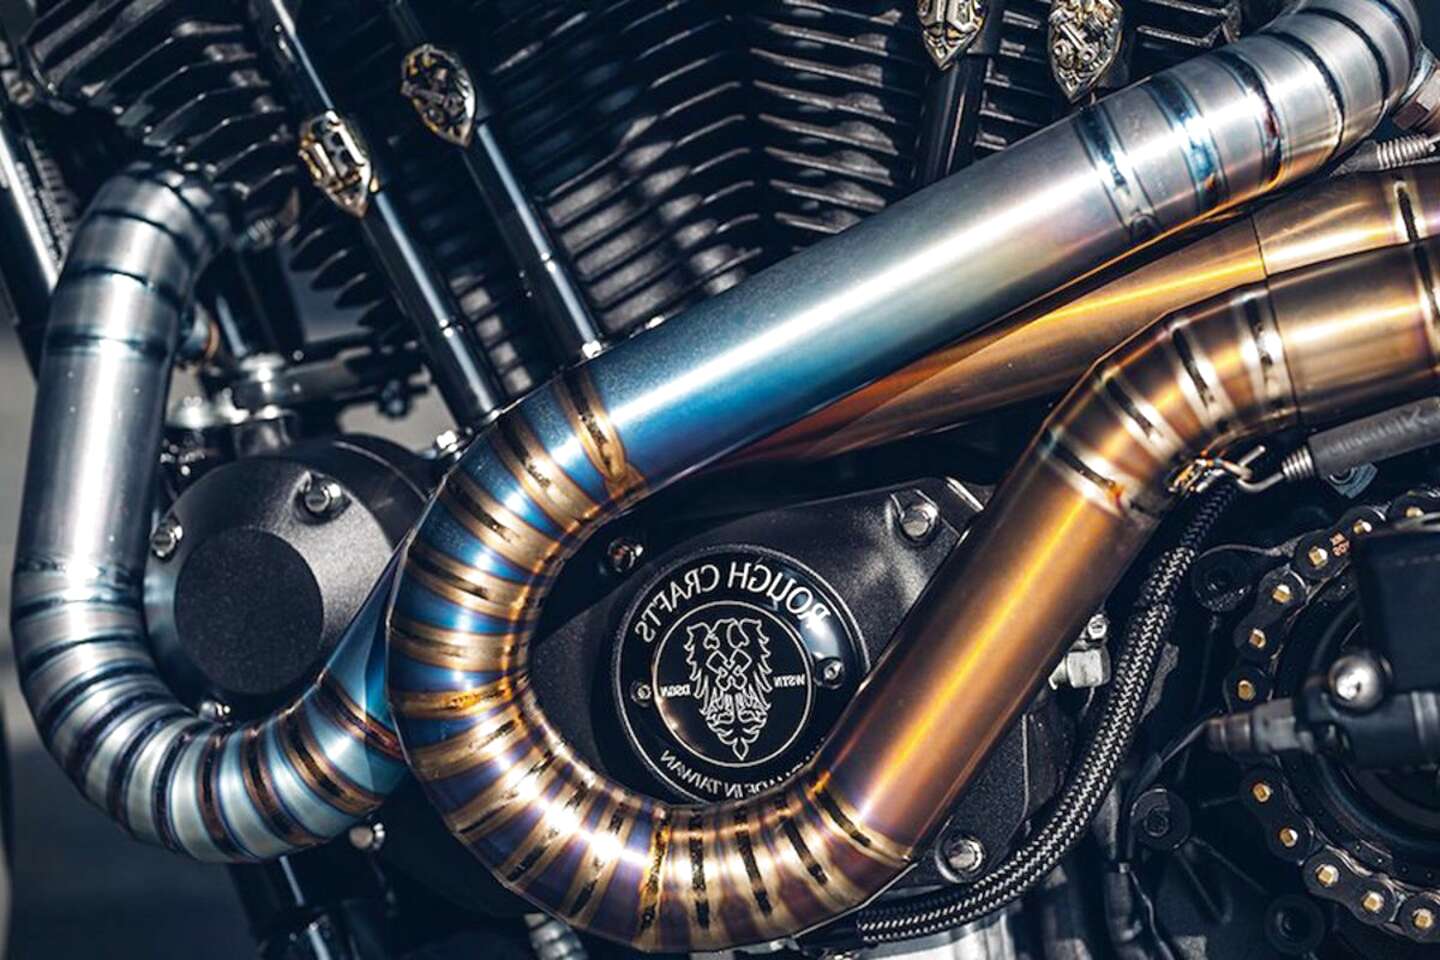 Spectacular Gallery Of motorcycle exhaust pipes Photos - Motorcycle helmet